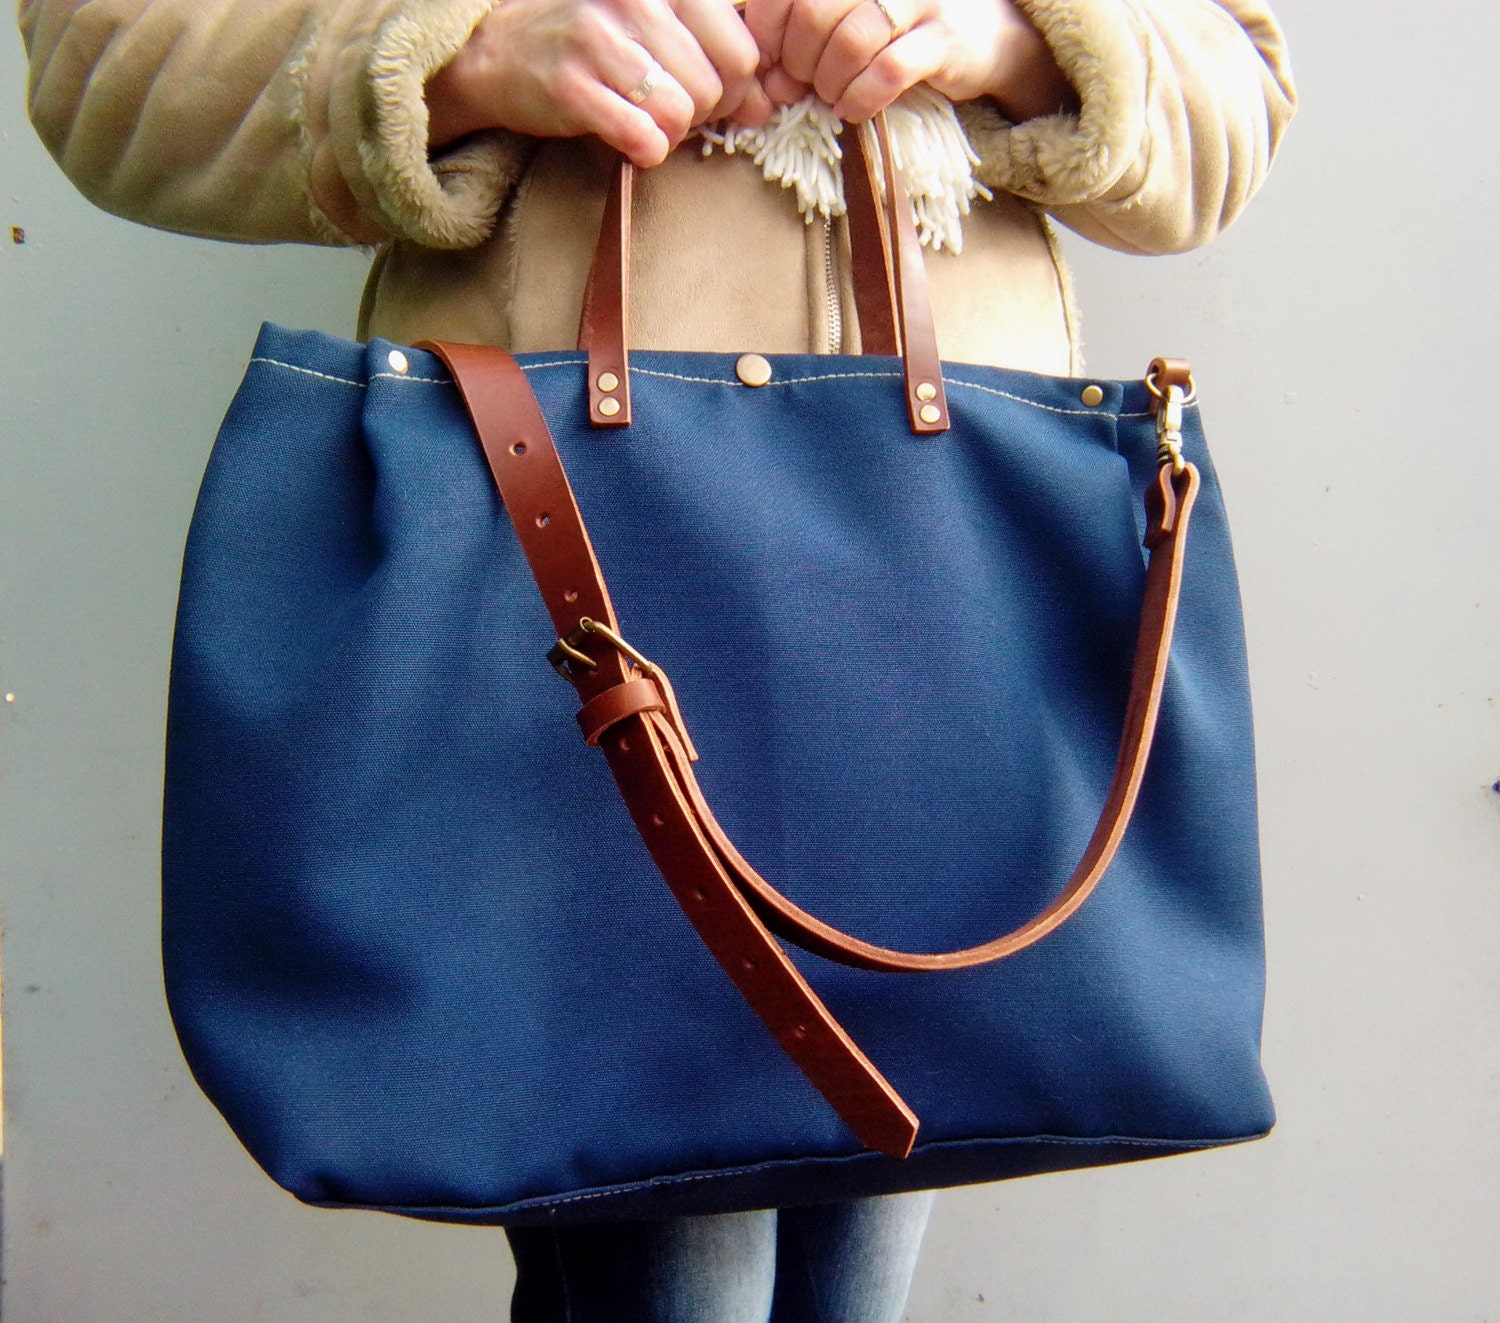 Waxed canvas tote bag with leather handles and leather